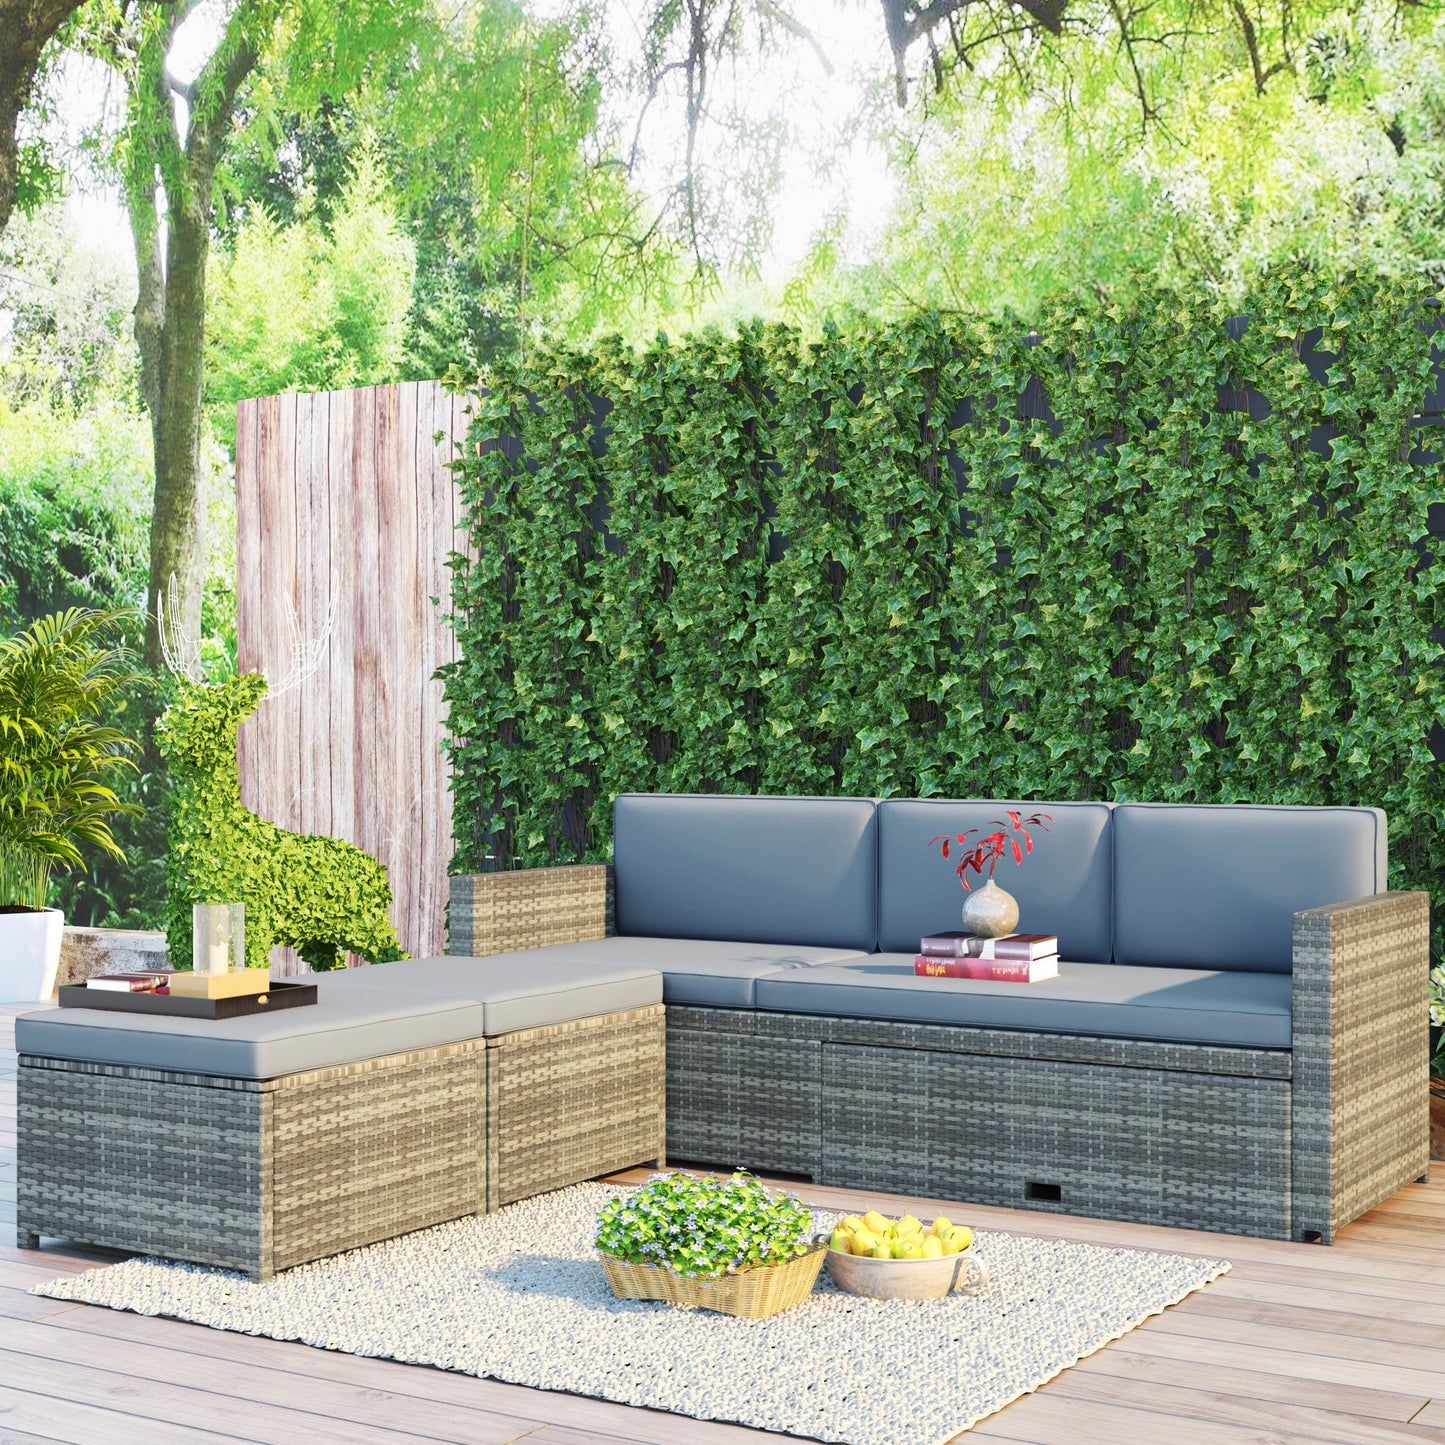 TOPMAX 4-piece Outdoor Backyard Gray Patio Table and Chairs Sectional Rattan Sofa Set